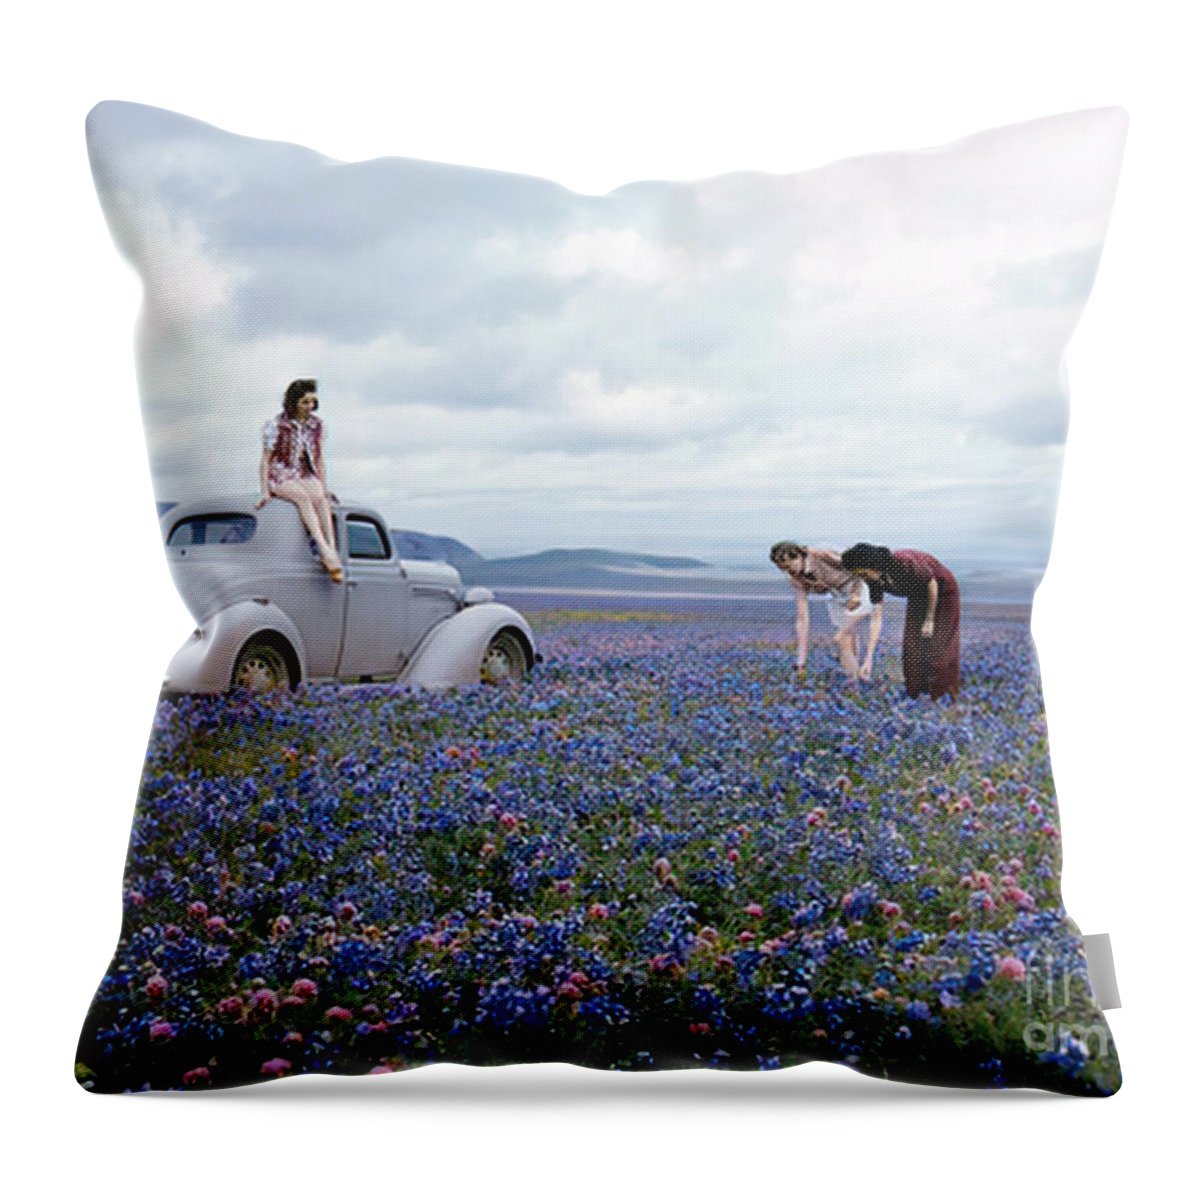 Vintage Throw Pillow featuring the photograph Women Picking Daisies In Meadow With 1930s Vehicle by Retrographs